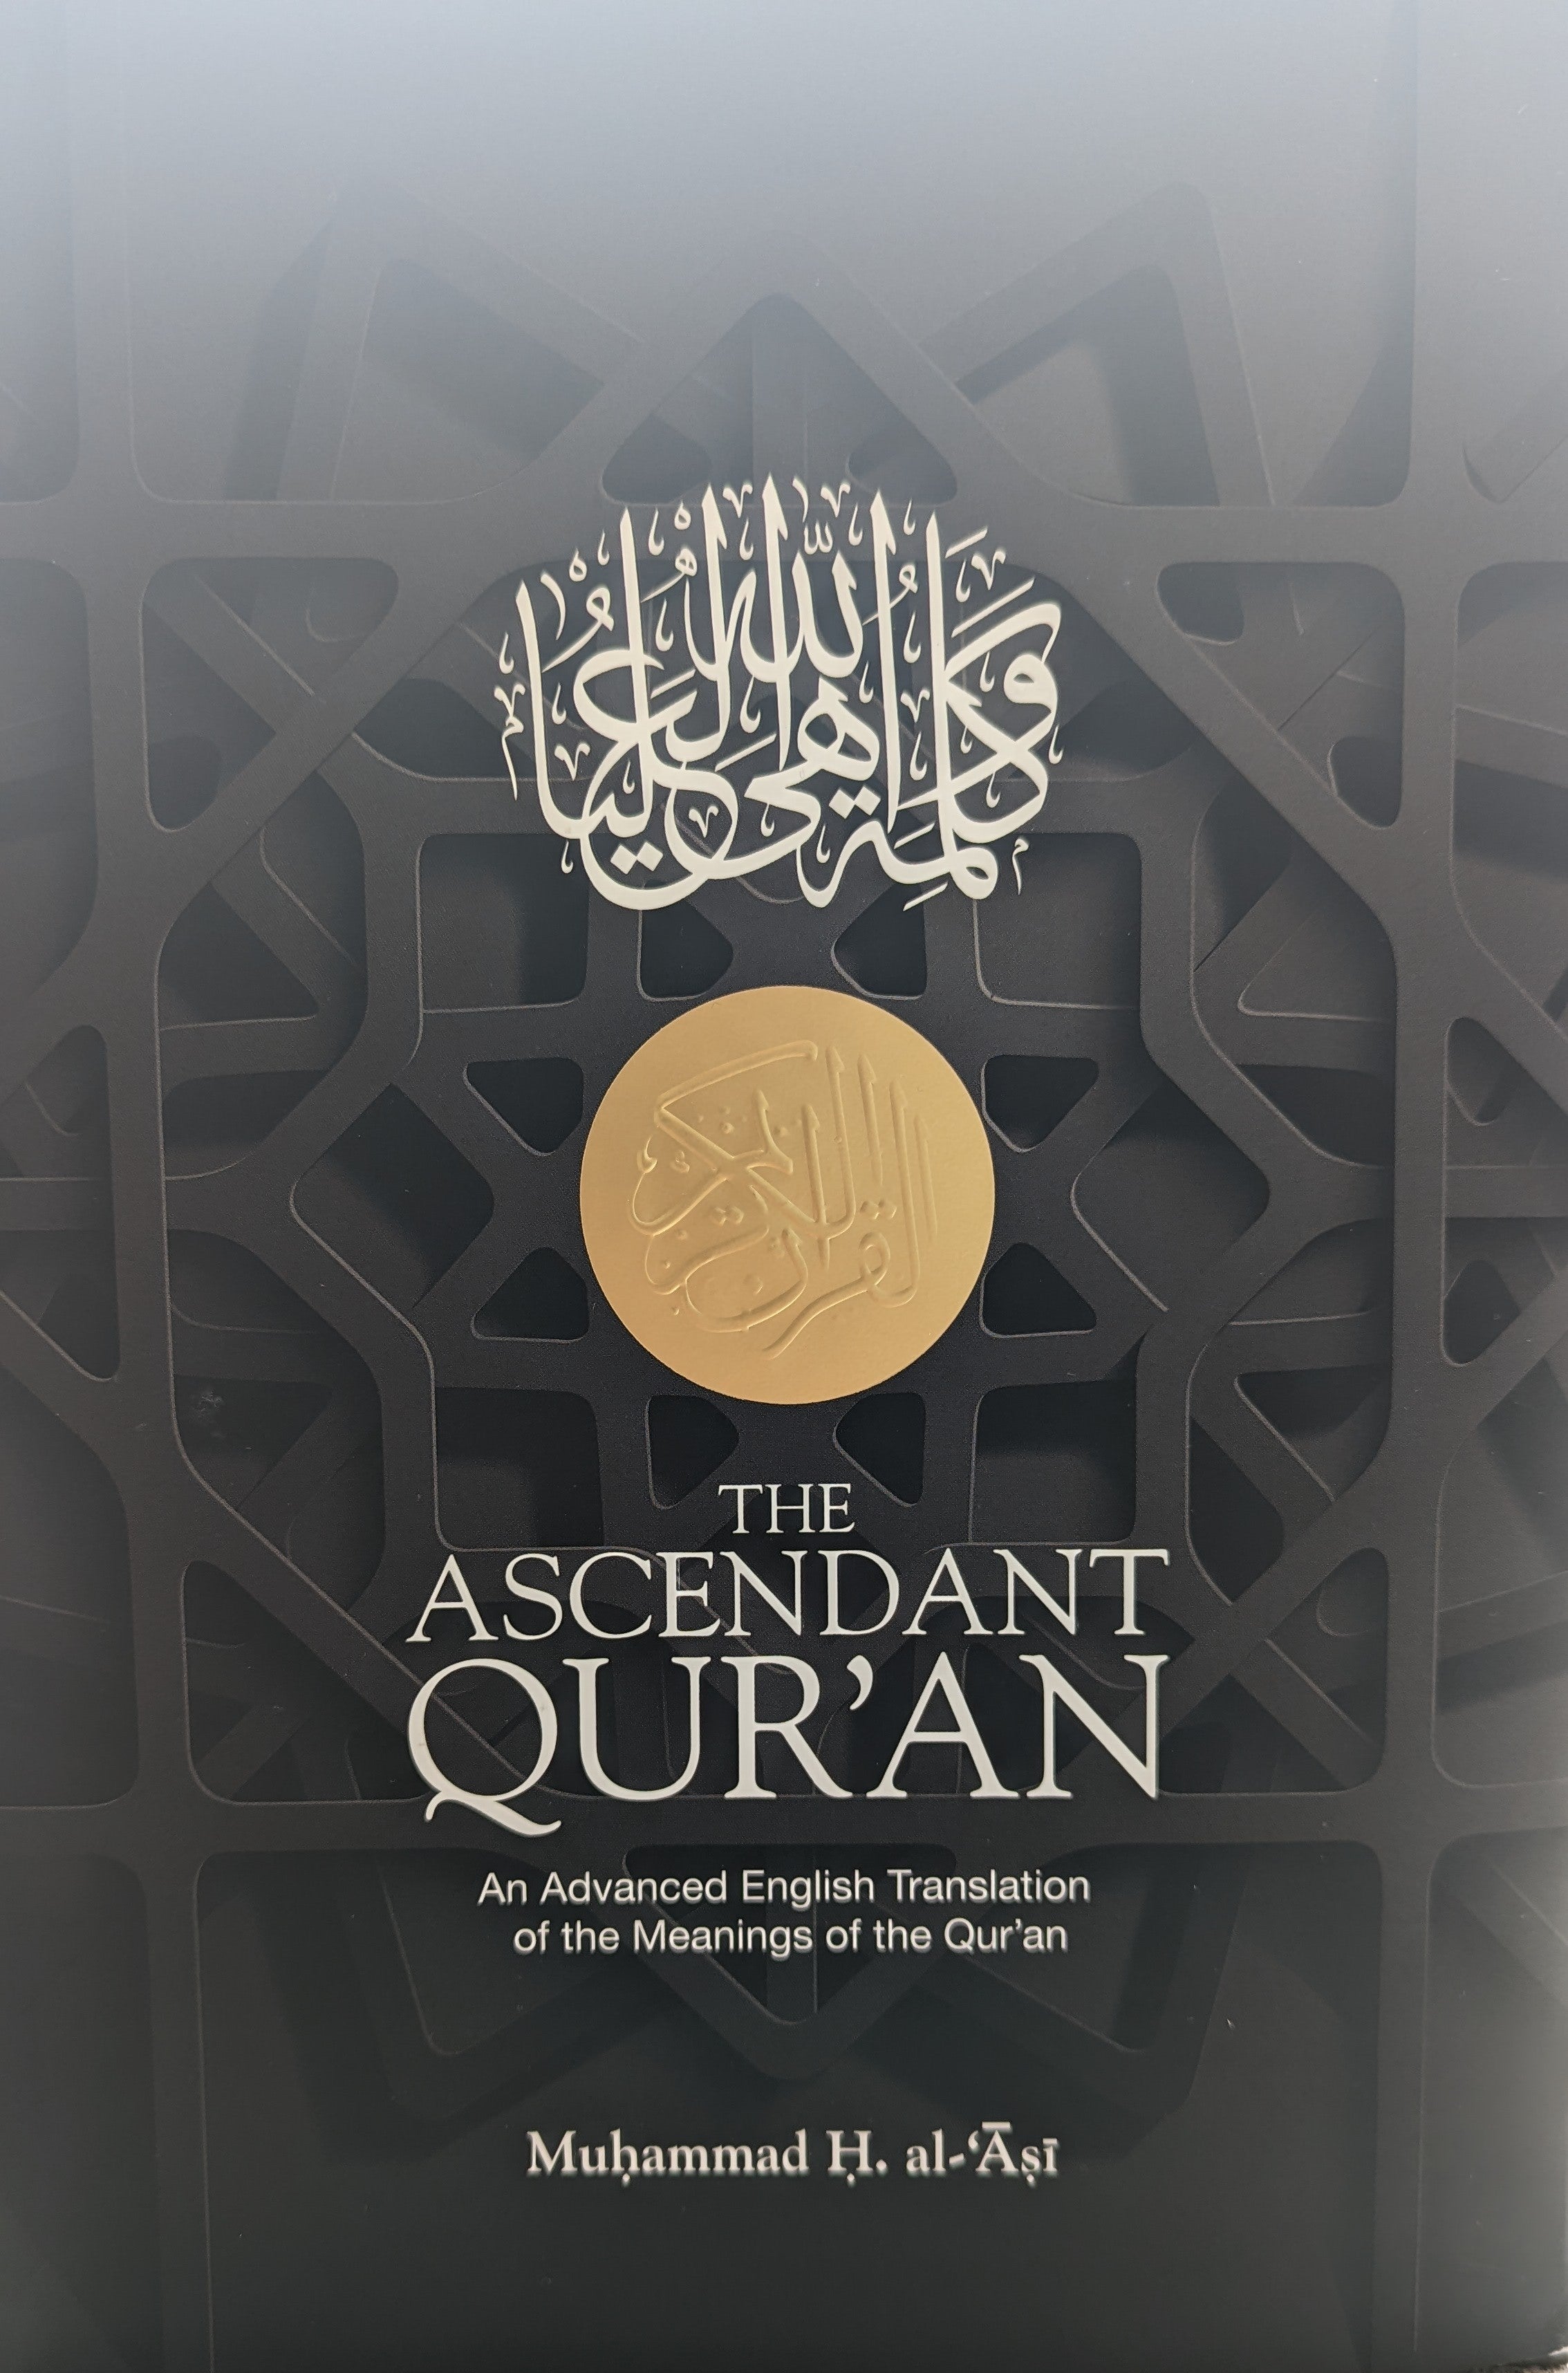 The Ascendant Qur'an: An Advanced English Translation of the Qur'an - Muhammad H. al-Asi